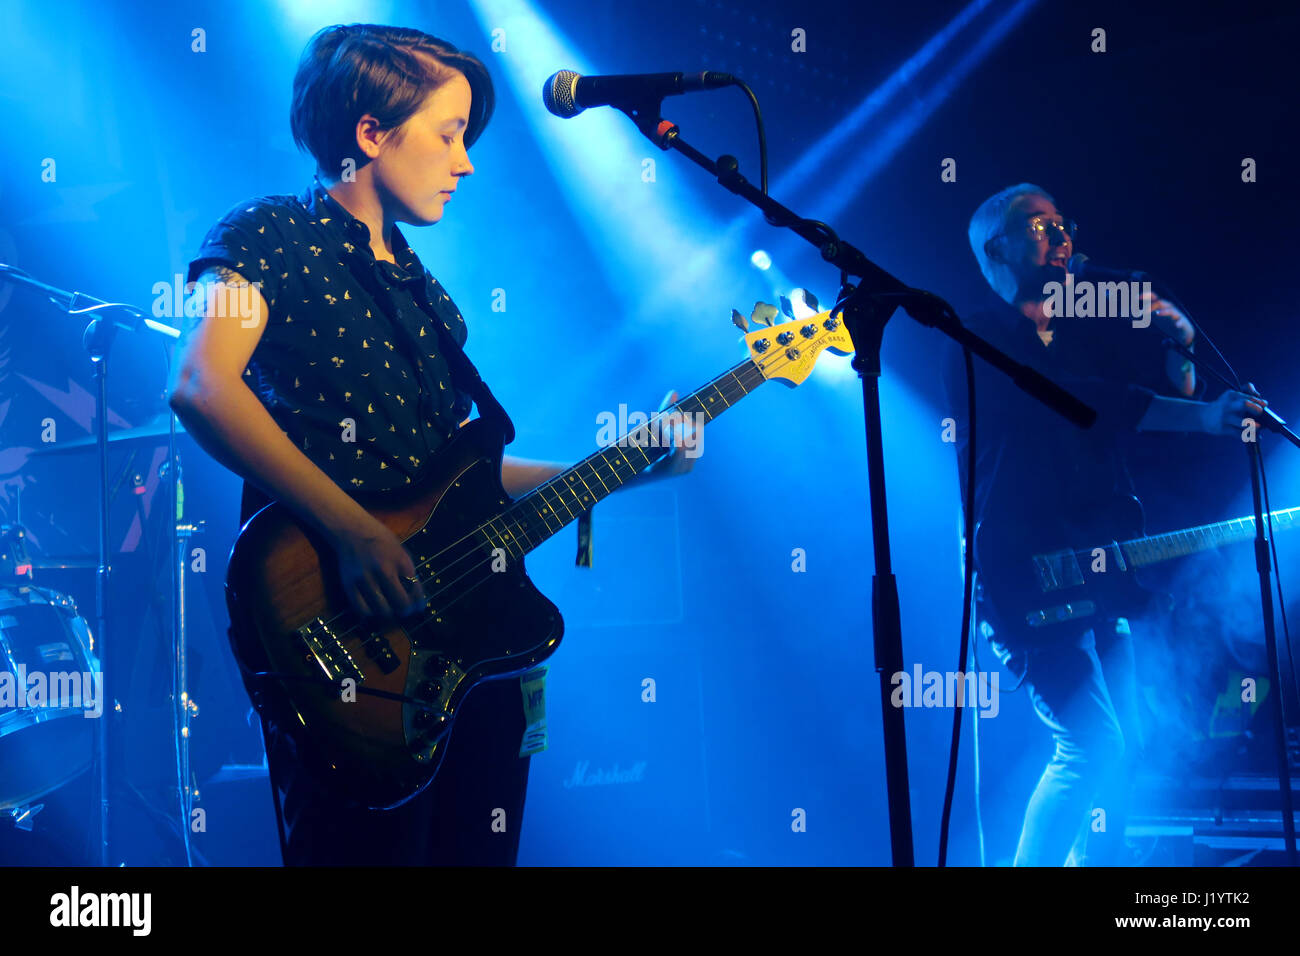 Manchester, UK. 22nd April, 2017. Naomi Griffin and Jc Cairns of Martha the County Durham indie pop punk band performing live in concert at Gorilla in Manchester as part of the Manchester Punk Fest (22.04.2017) Credit: Chris Rogers/Alamy Live News Stock Photo